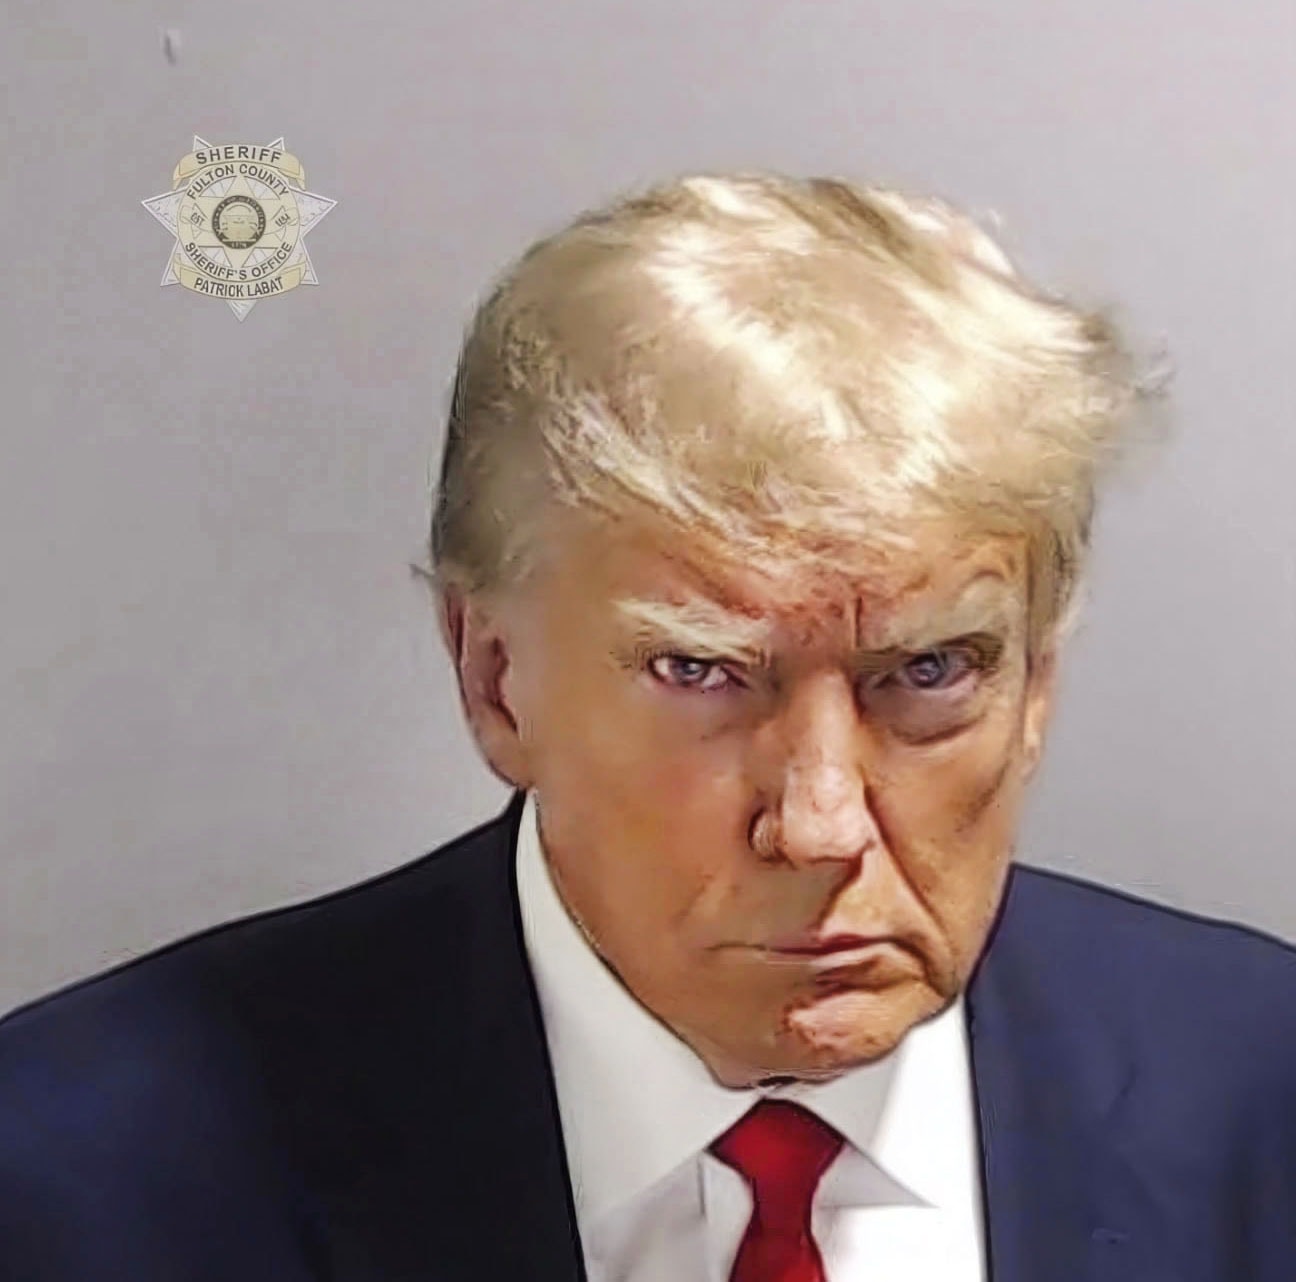 The former president glowers for his booking photo. Rather than a painful moment as it would be for most normal people, he turned it into a fundraising opportunity. The grift goes on.